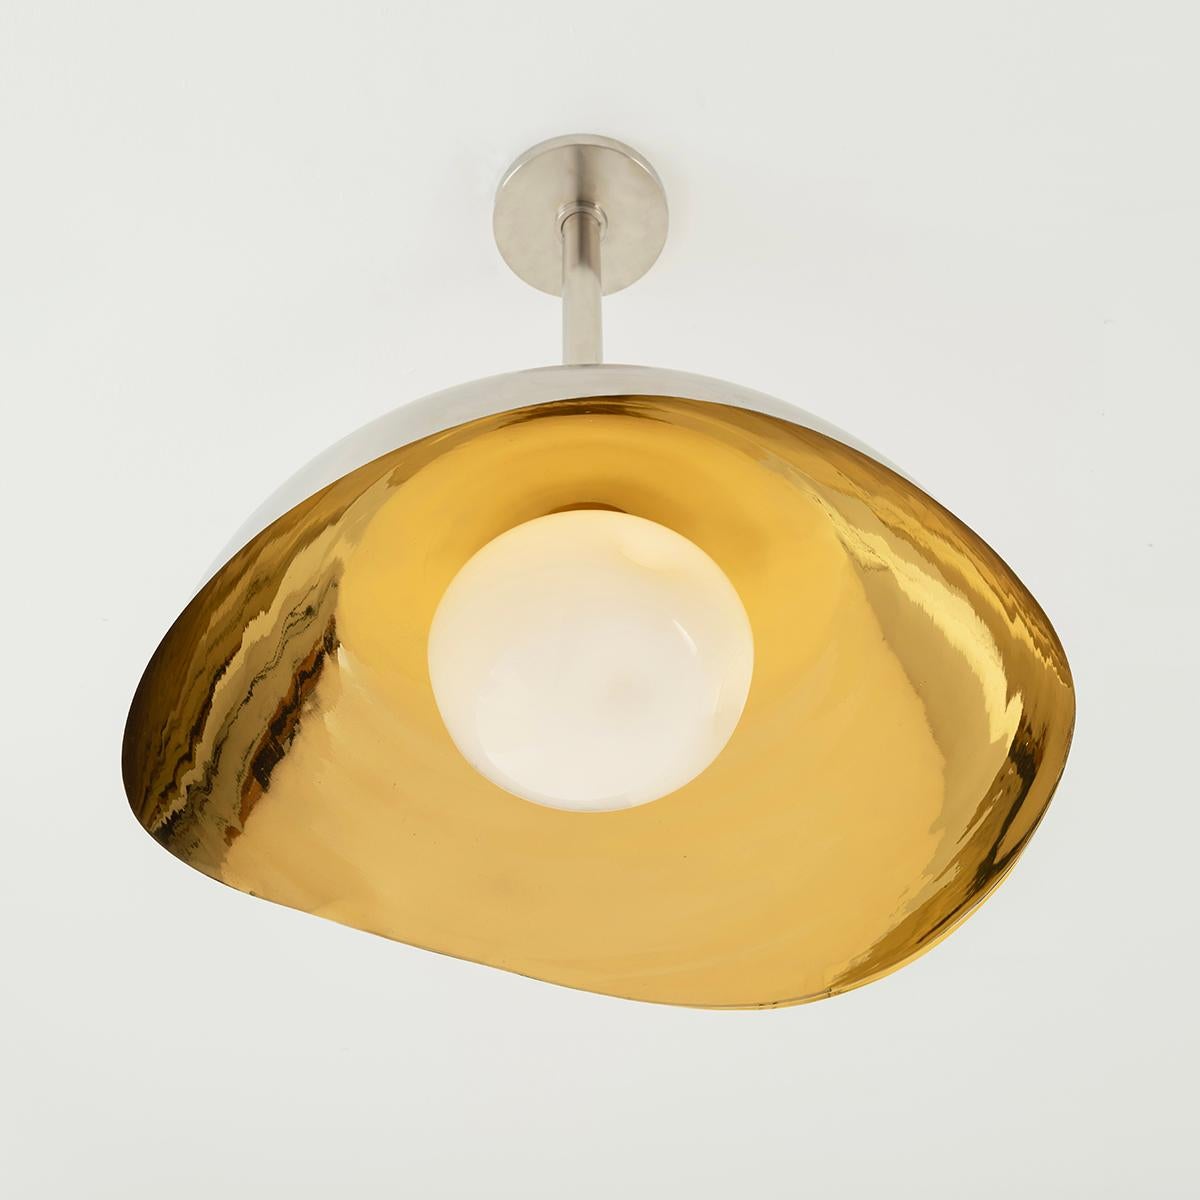 Perla Grande Ceiling Light - Copper Interior and Enamel Exterior In New Condition For Sale In New York, NY